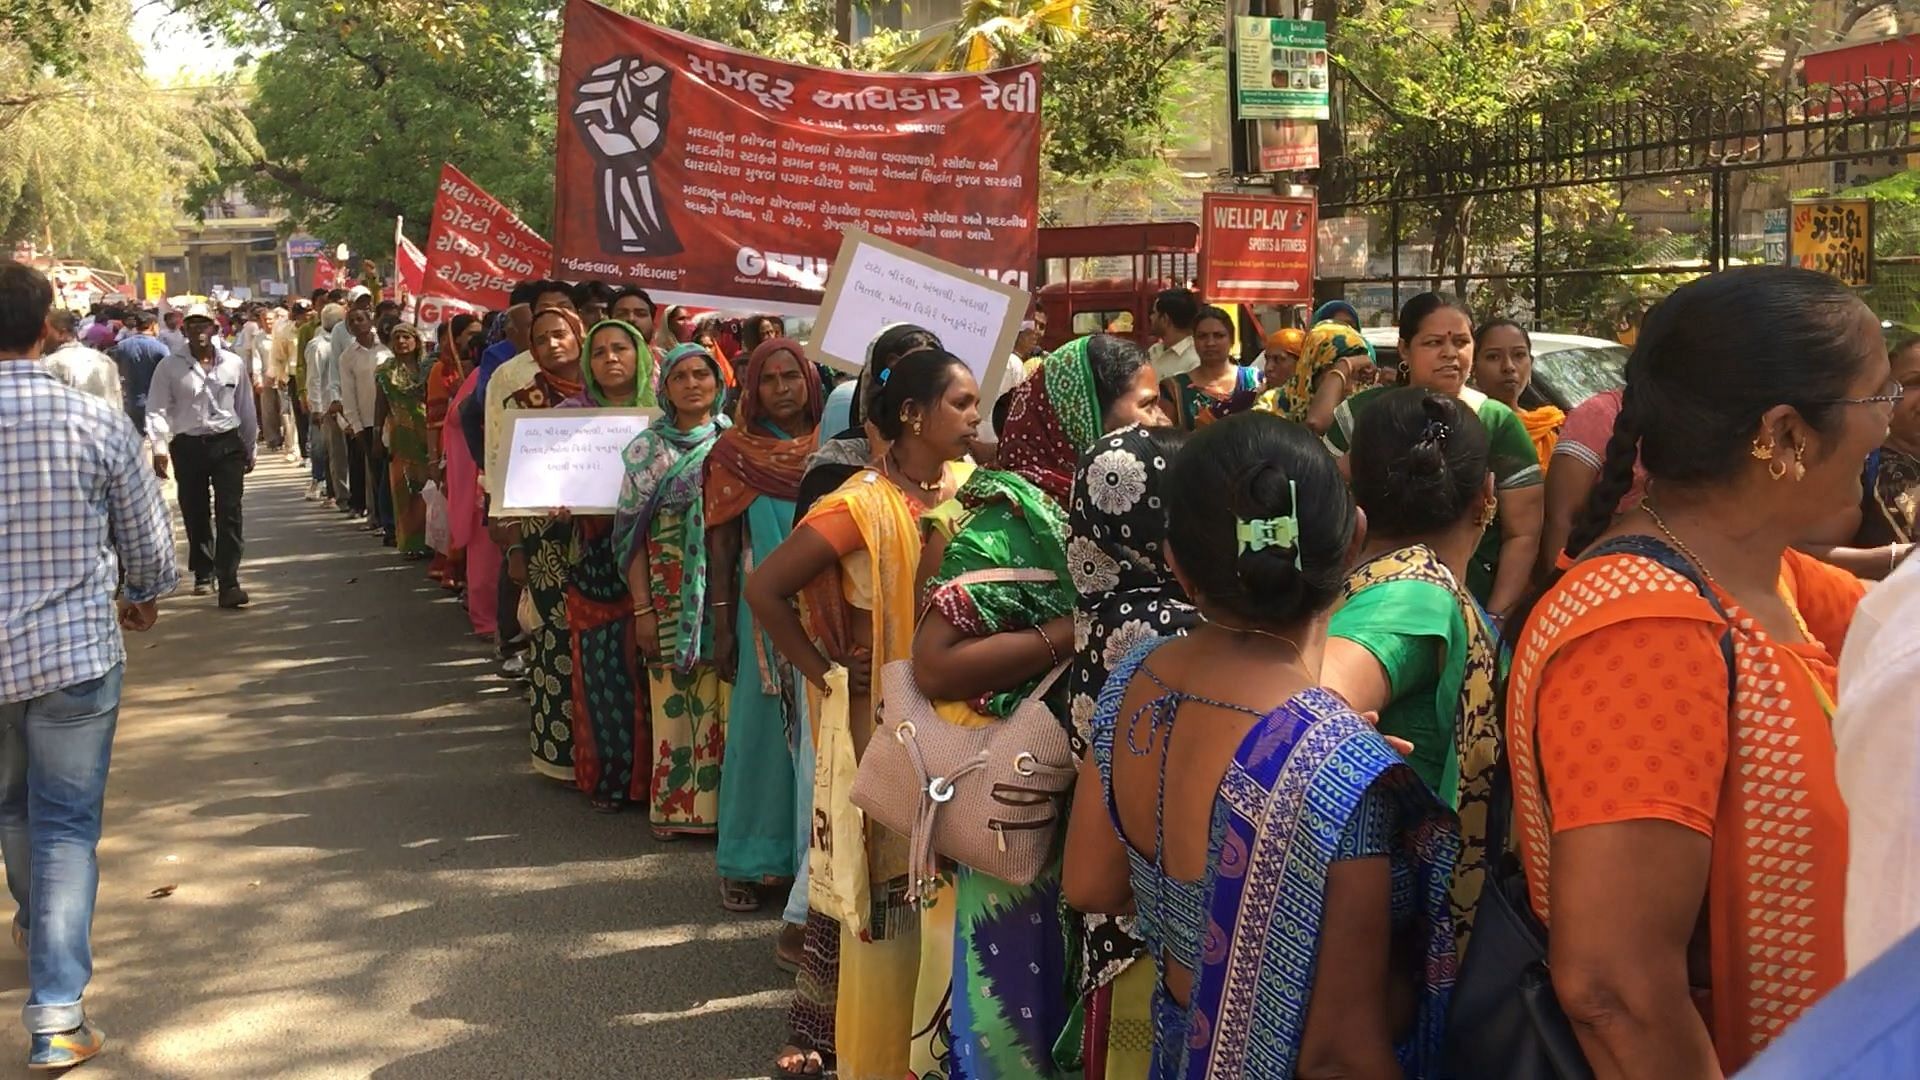 Security guards working under the Gujarat Industrial Security Force (GISF) took out a protest march in Ahmedabad on 28 March to demand higher pay and scrapping of contractual employment for good.